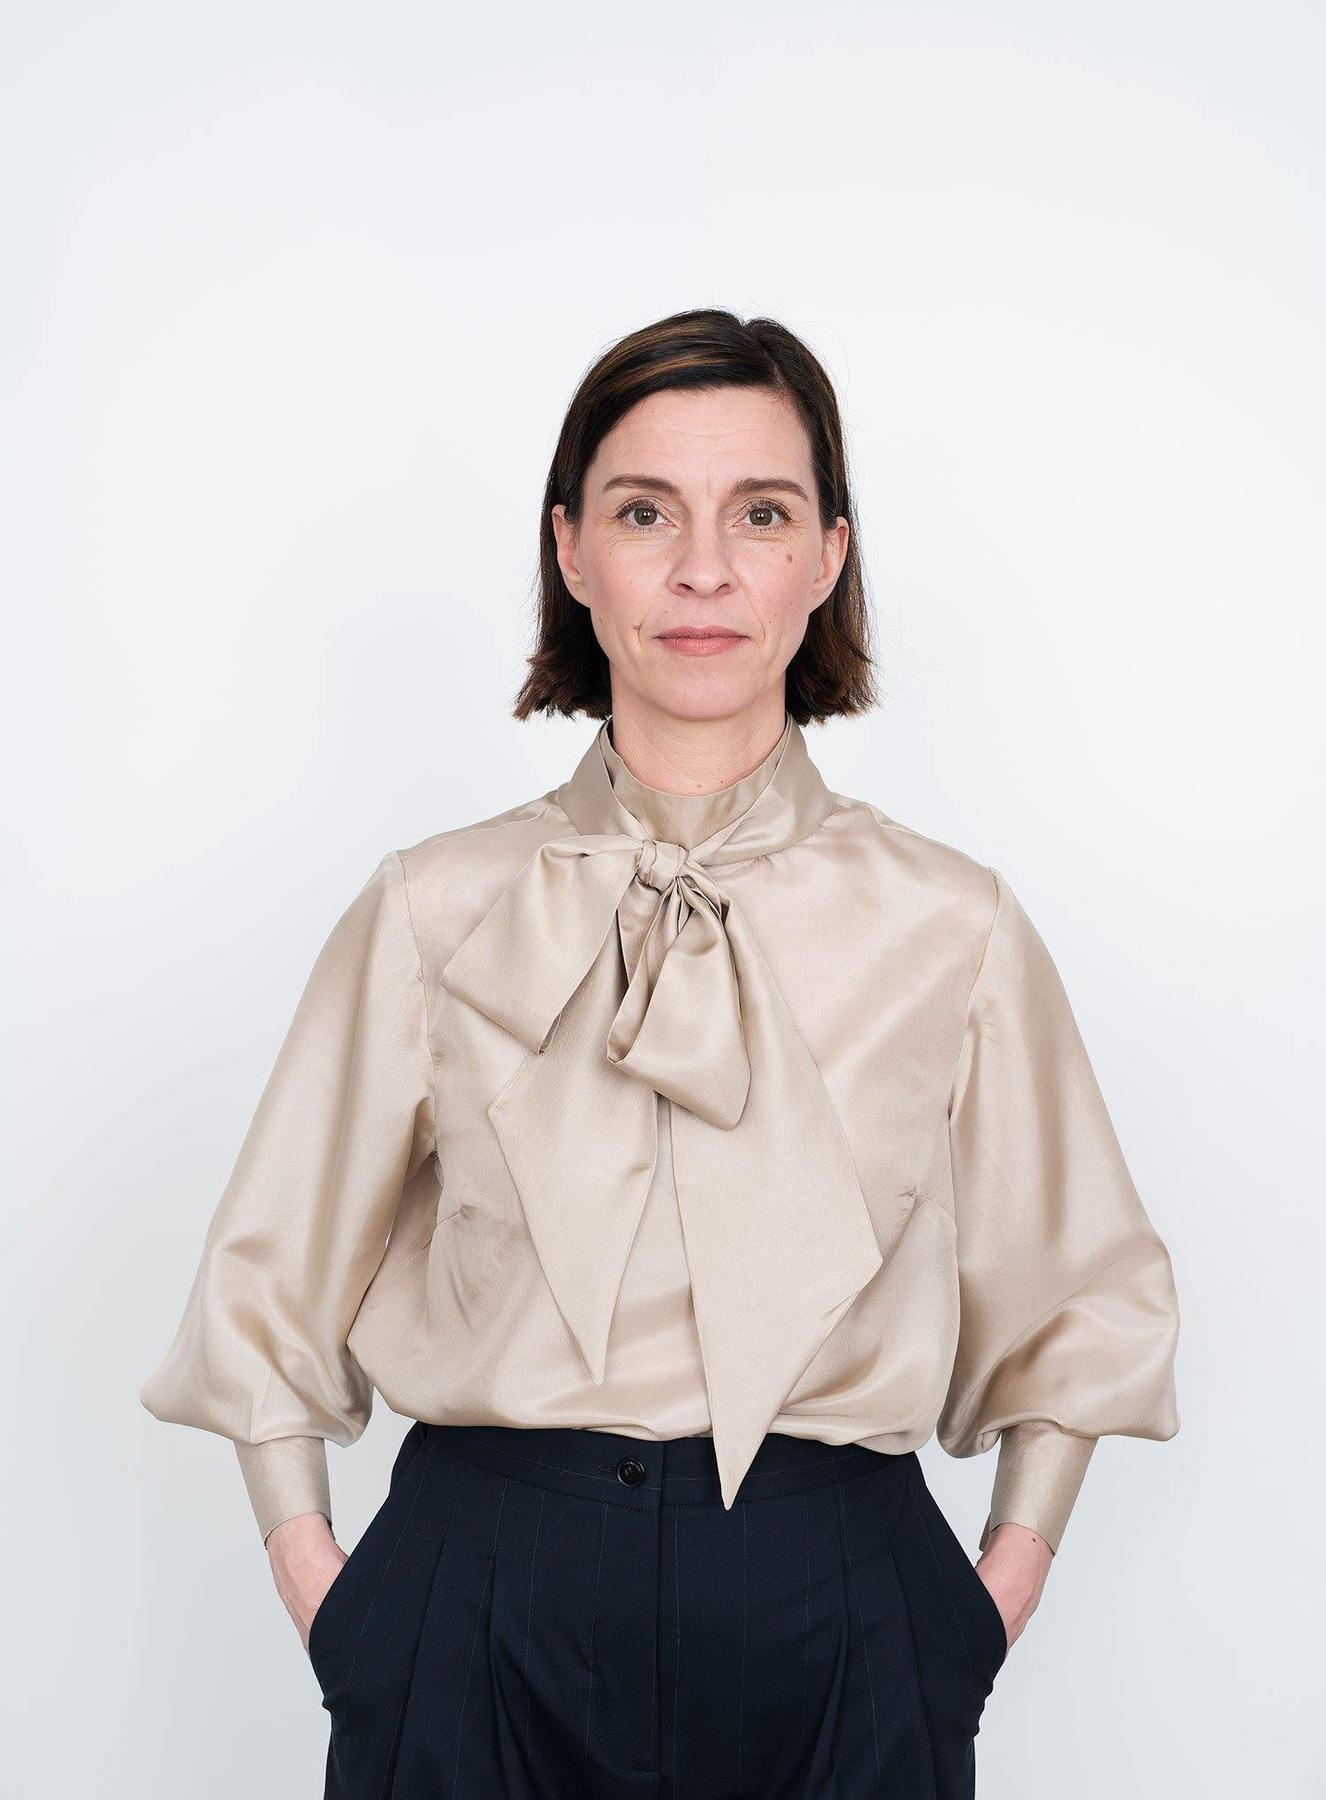 Woman wearing the Tie Bow Blouse sewing pattern by The Assembly Line. A blouse pattern made in cotton, silk, lawn, linen, crepe de chine or wool crepe fabrics, featuring, bust darts, a standing collar to which you can attach a tie with buttons at the back